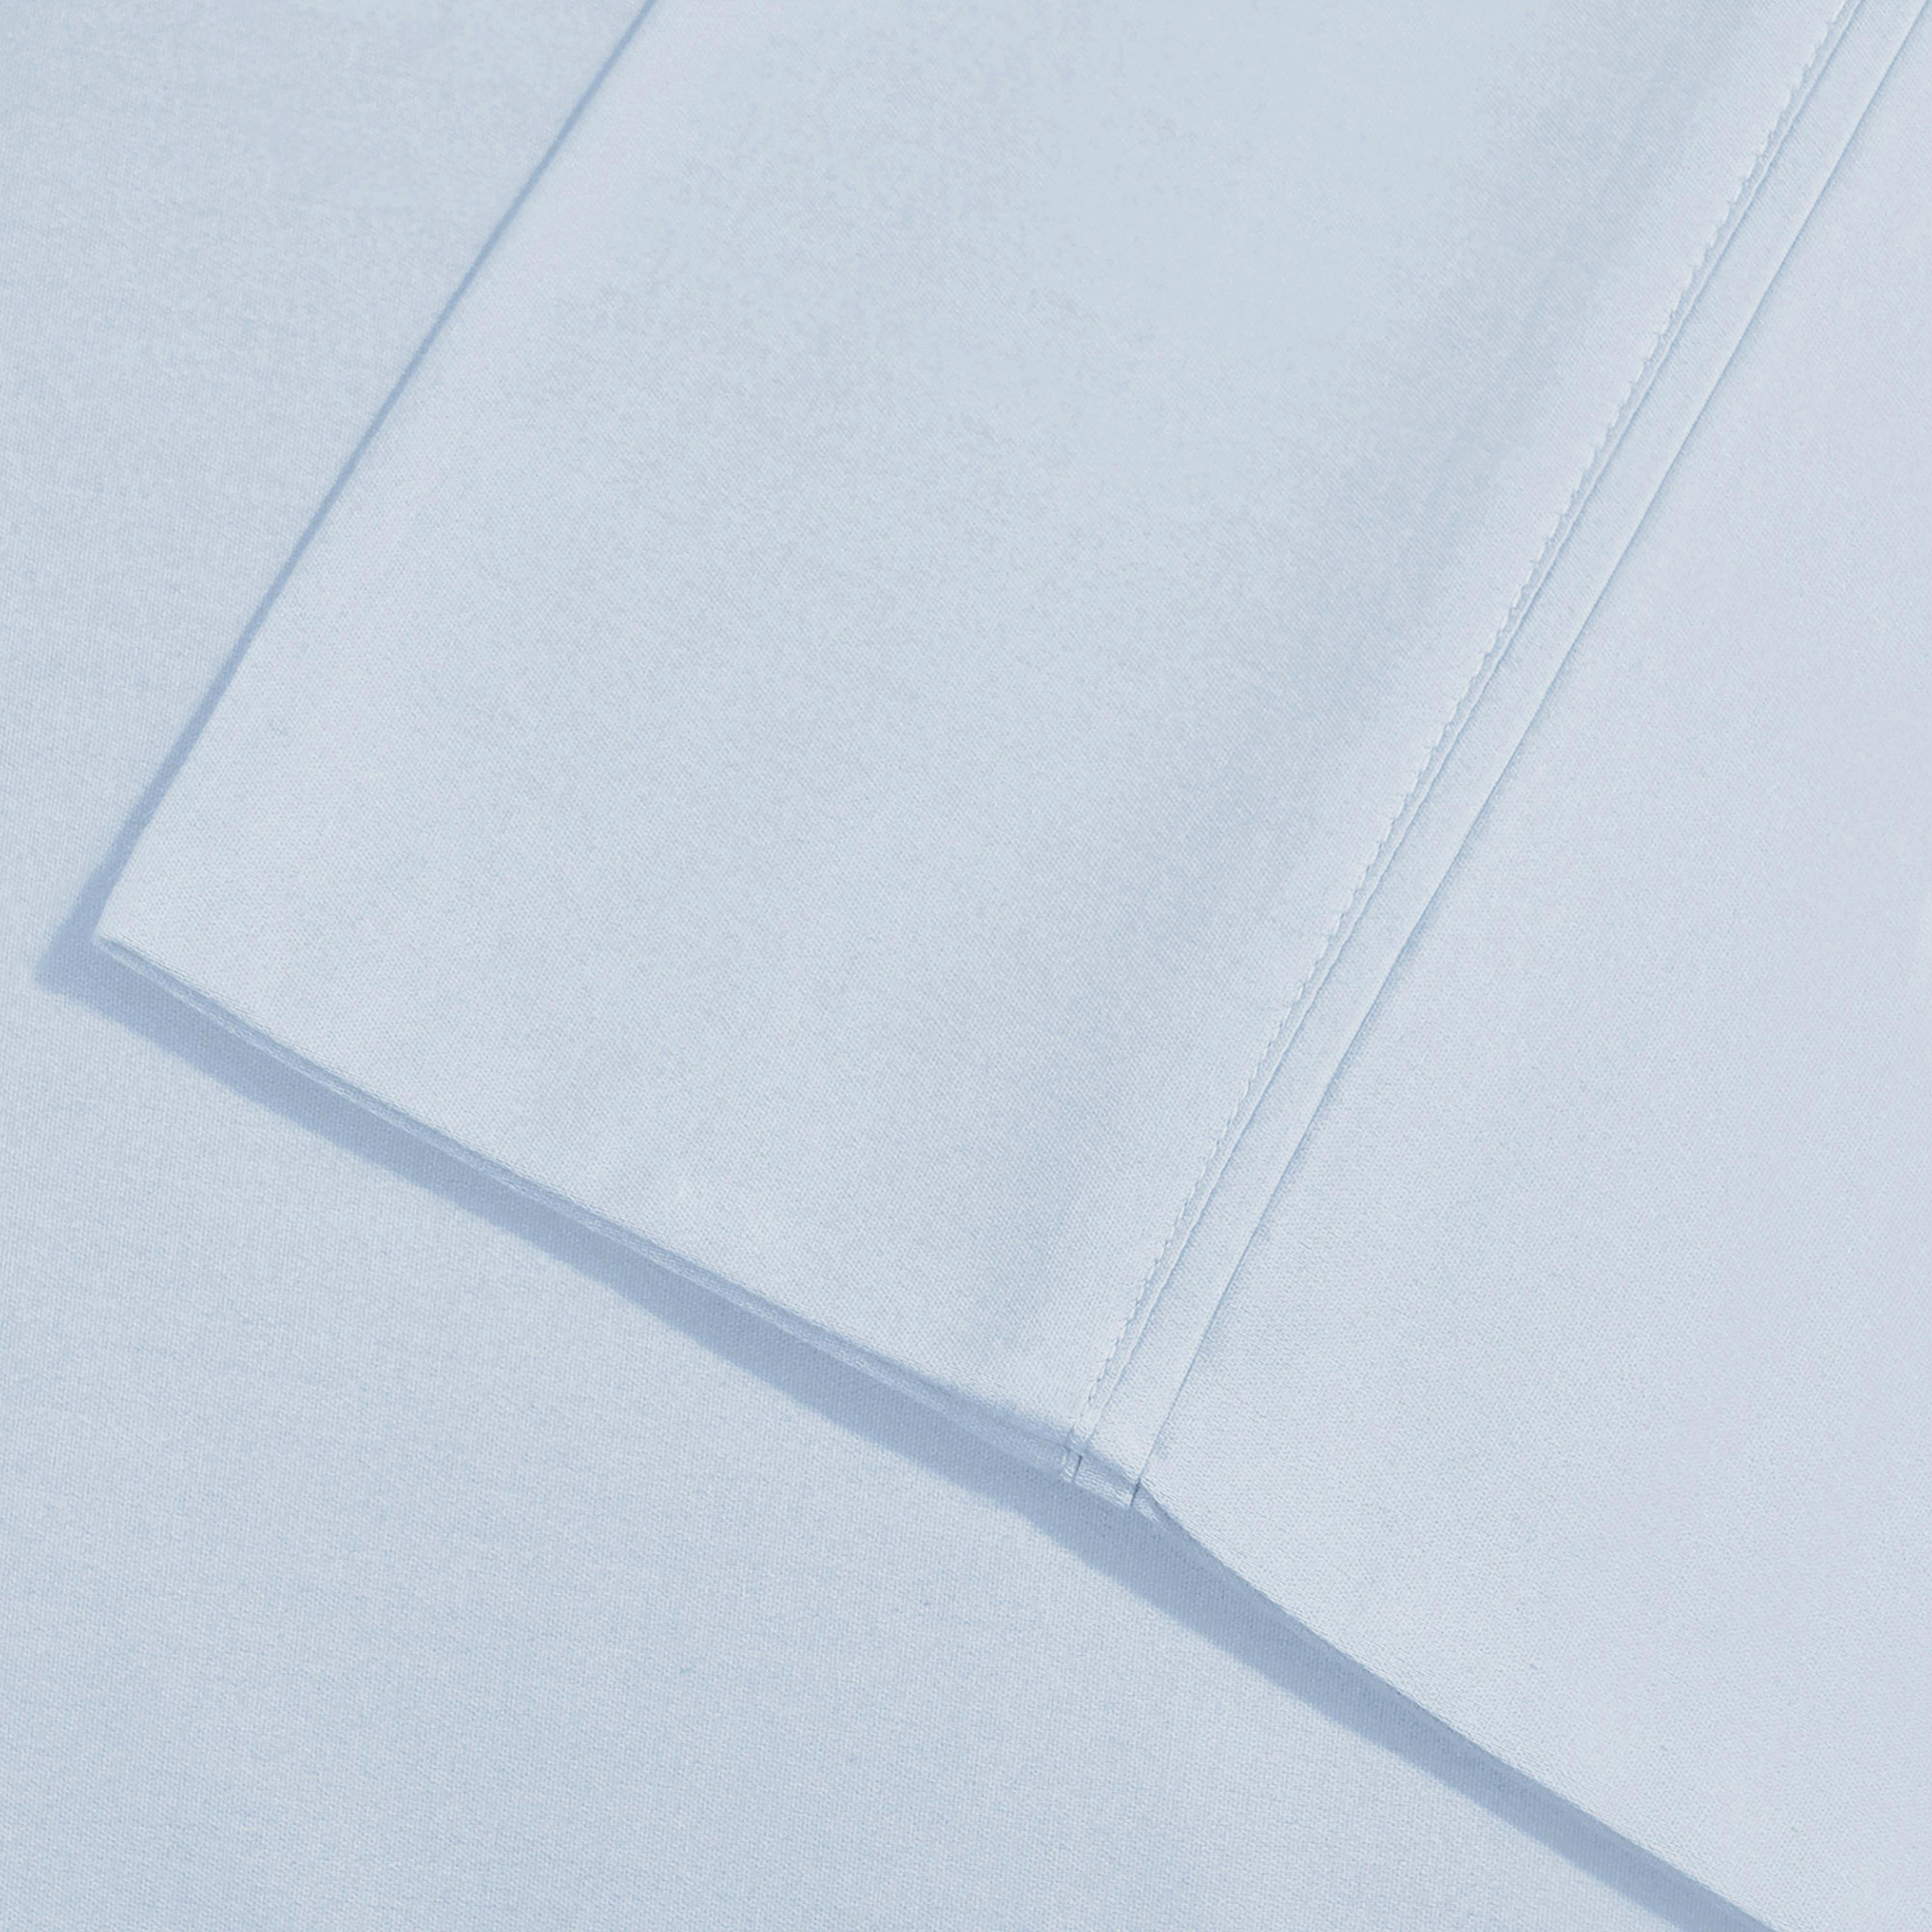 Superior 1000 Thread Count 4-Piece Solid Cotton Blend Sheet Set - image 3 of 6